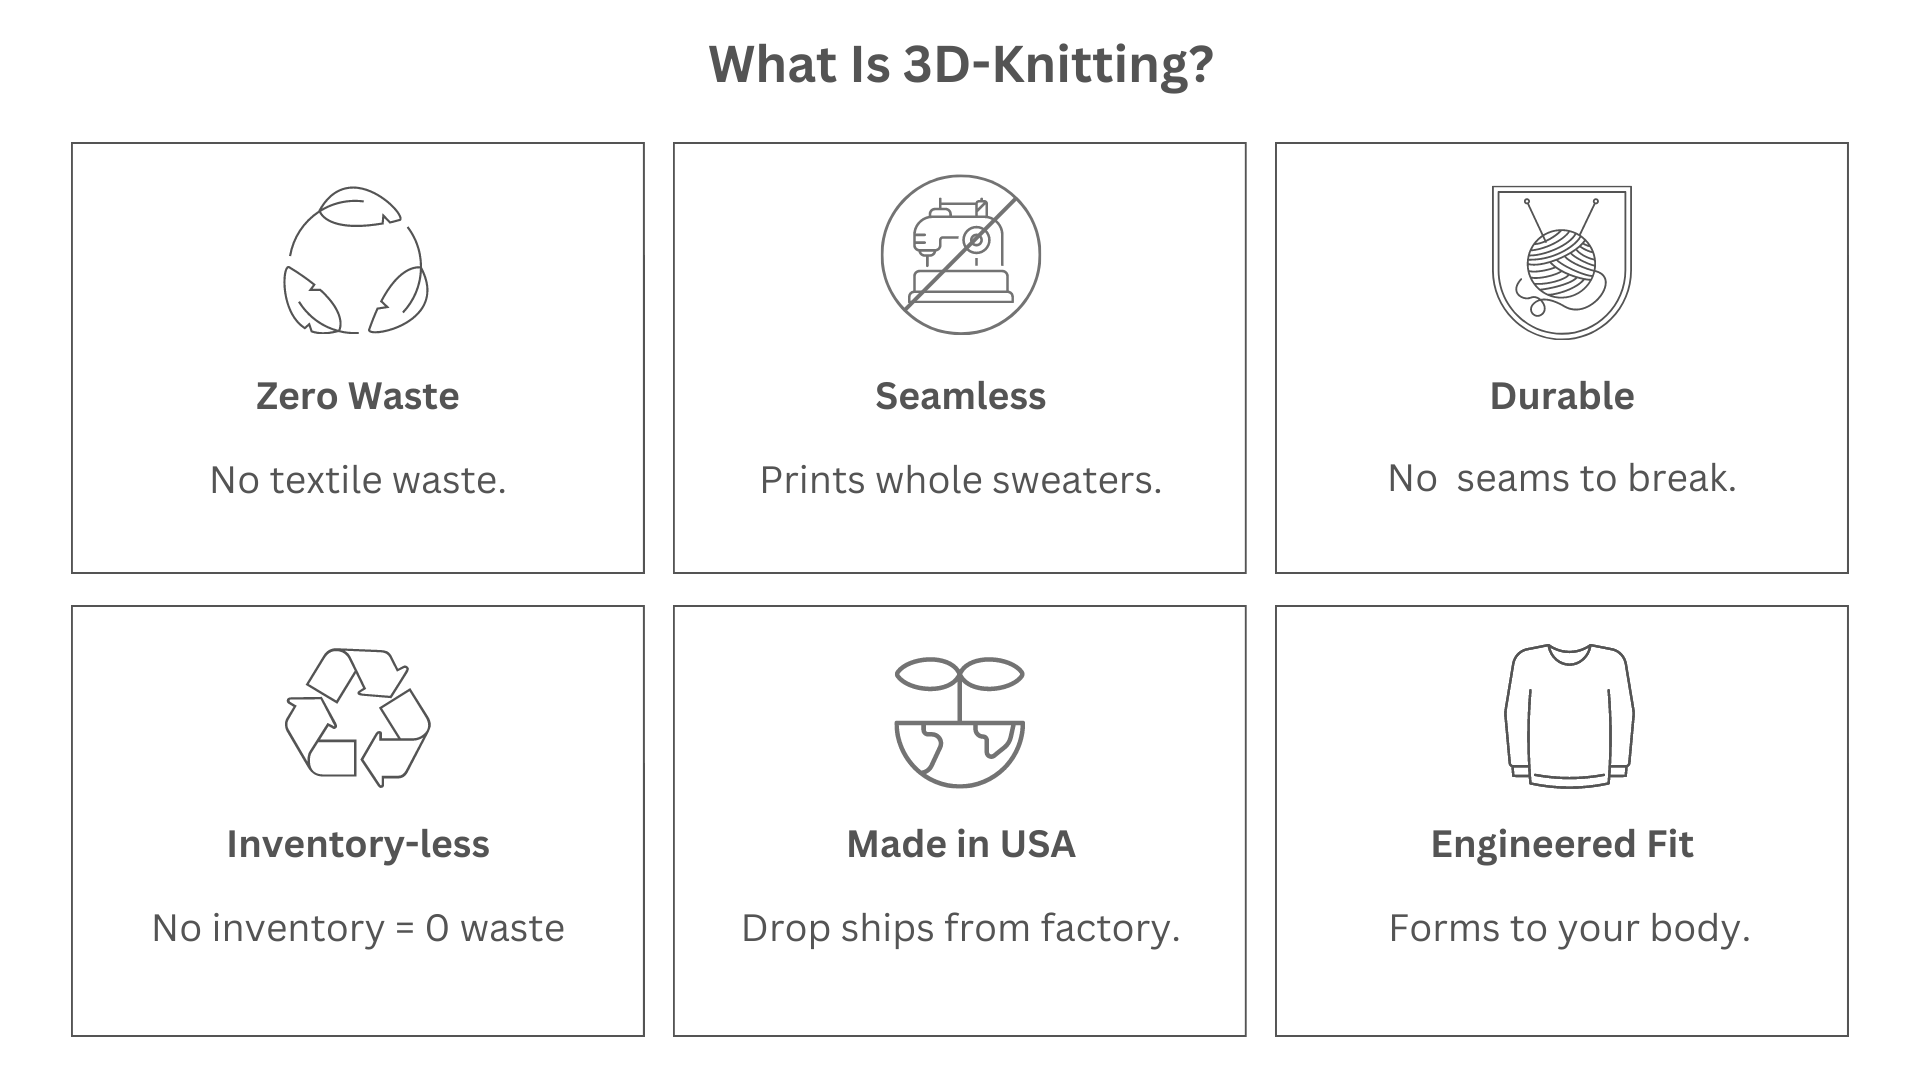 What is 3D knitting?